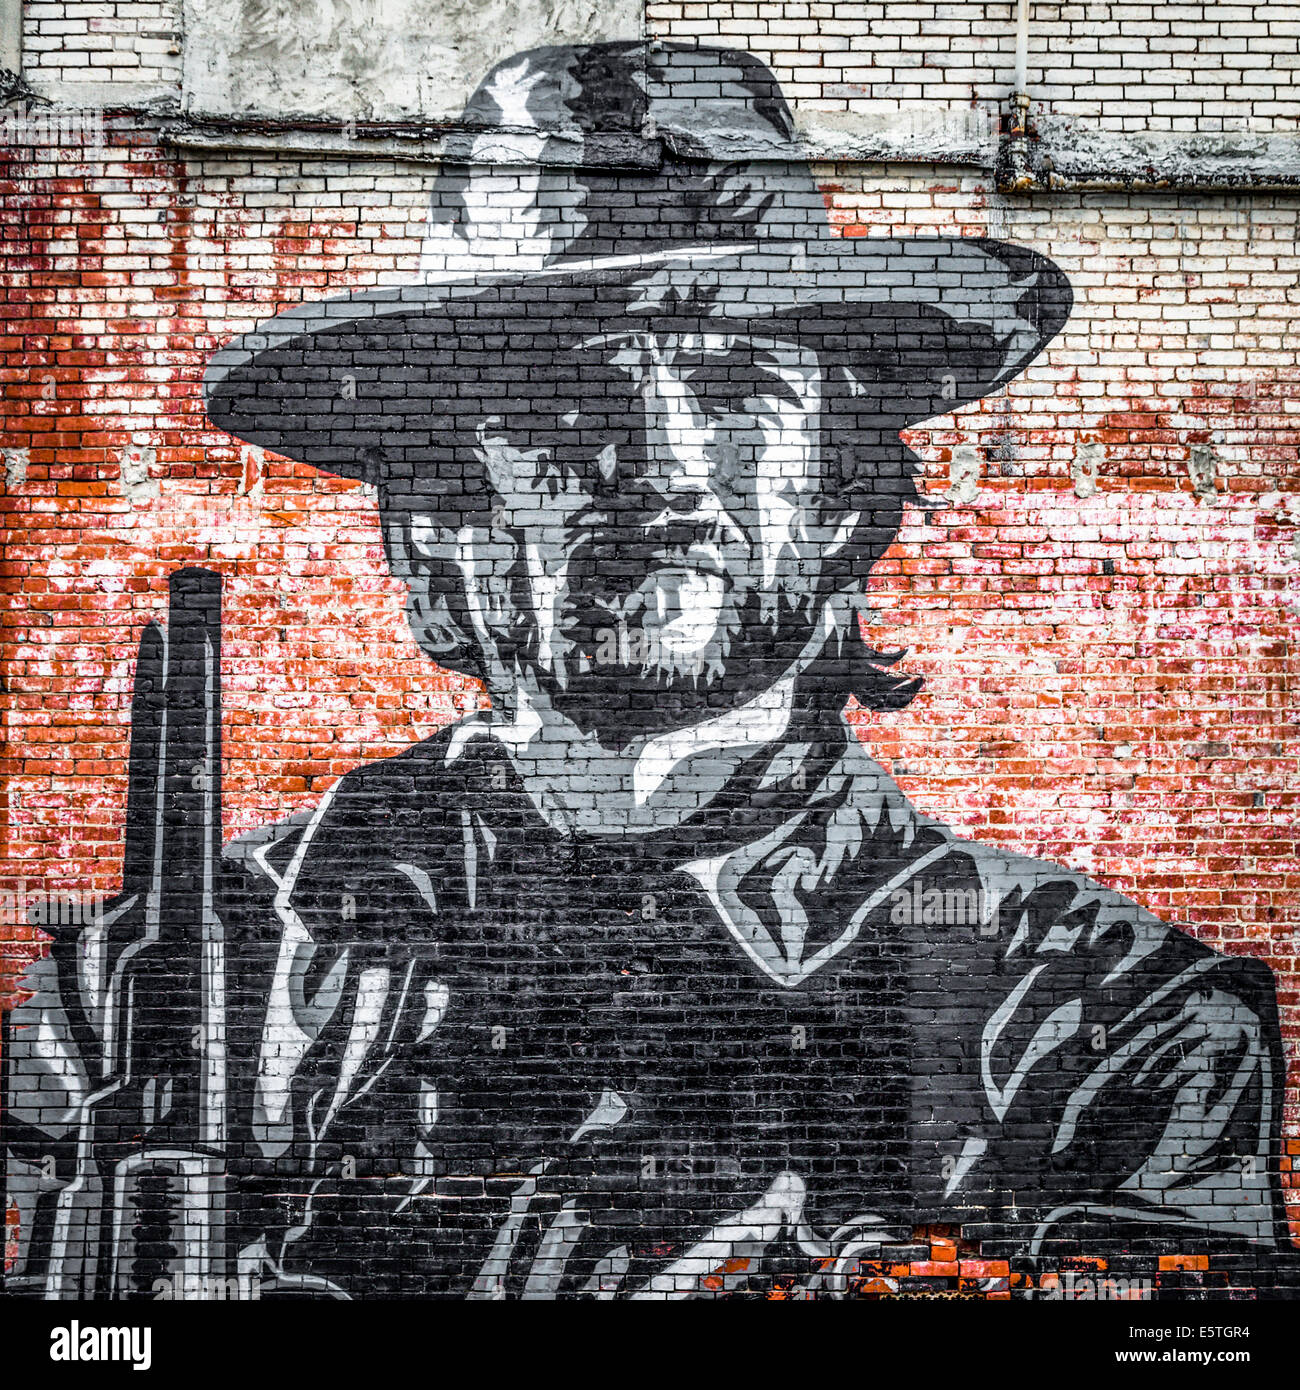 Street art, mural of a cowboy on a brick wall, Clarksdale, Mississippi, United States Stock Photo